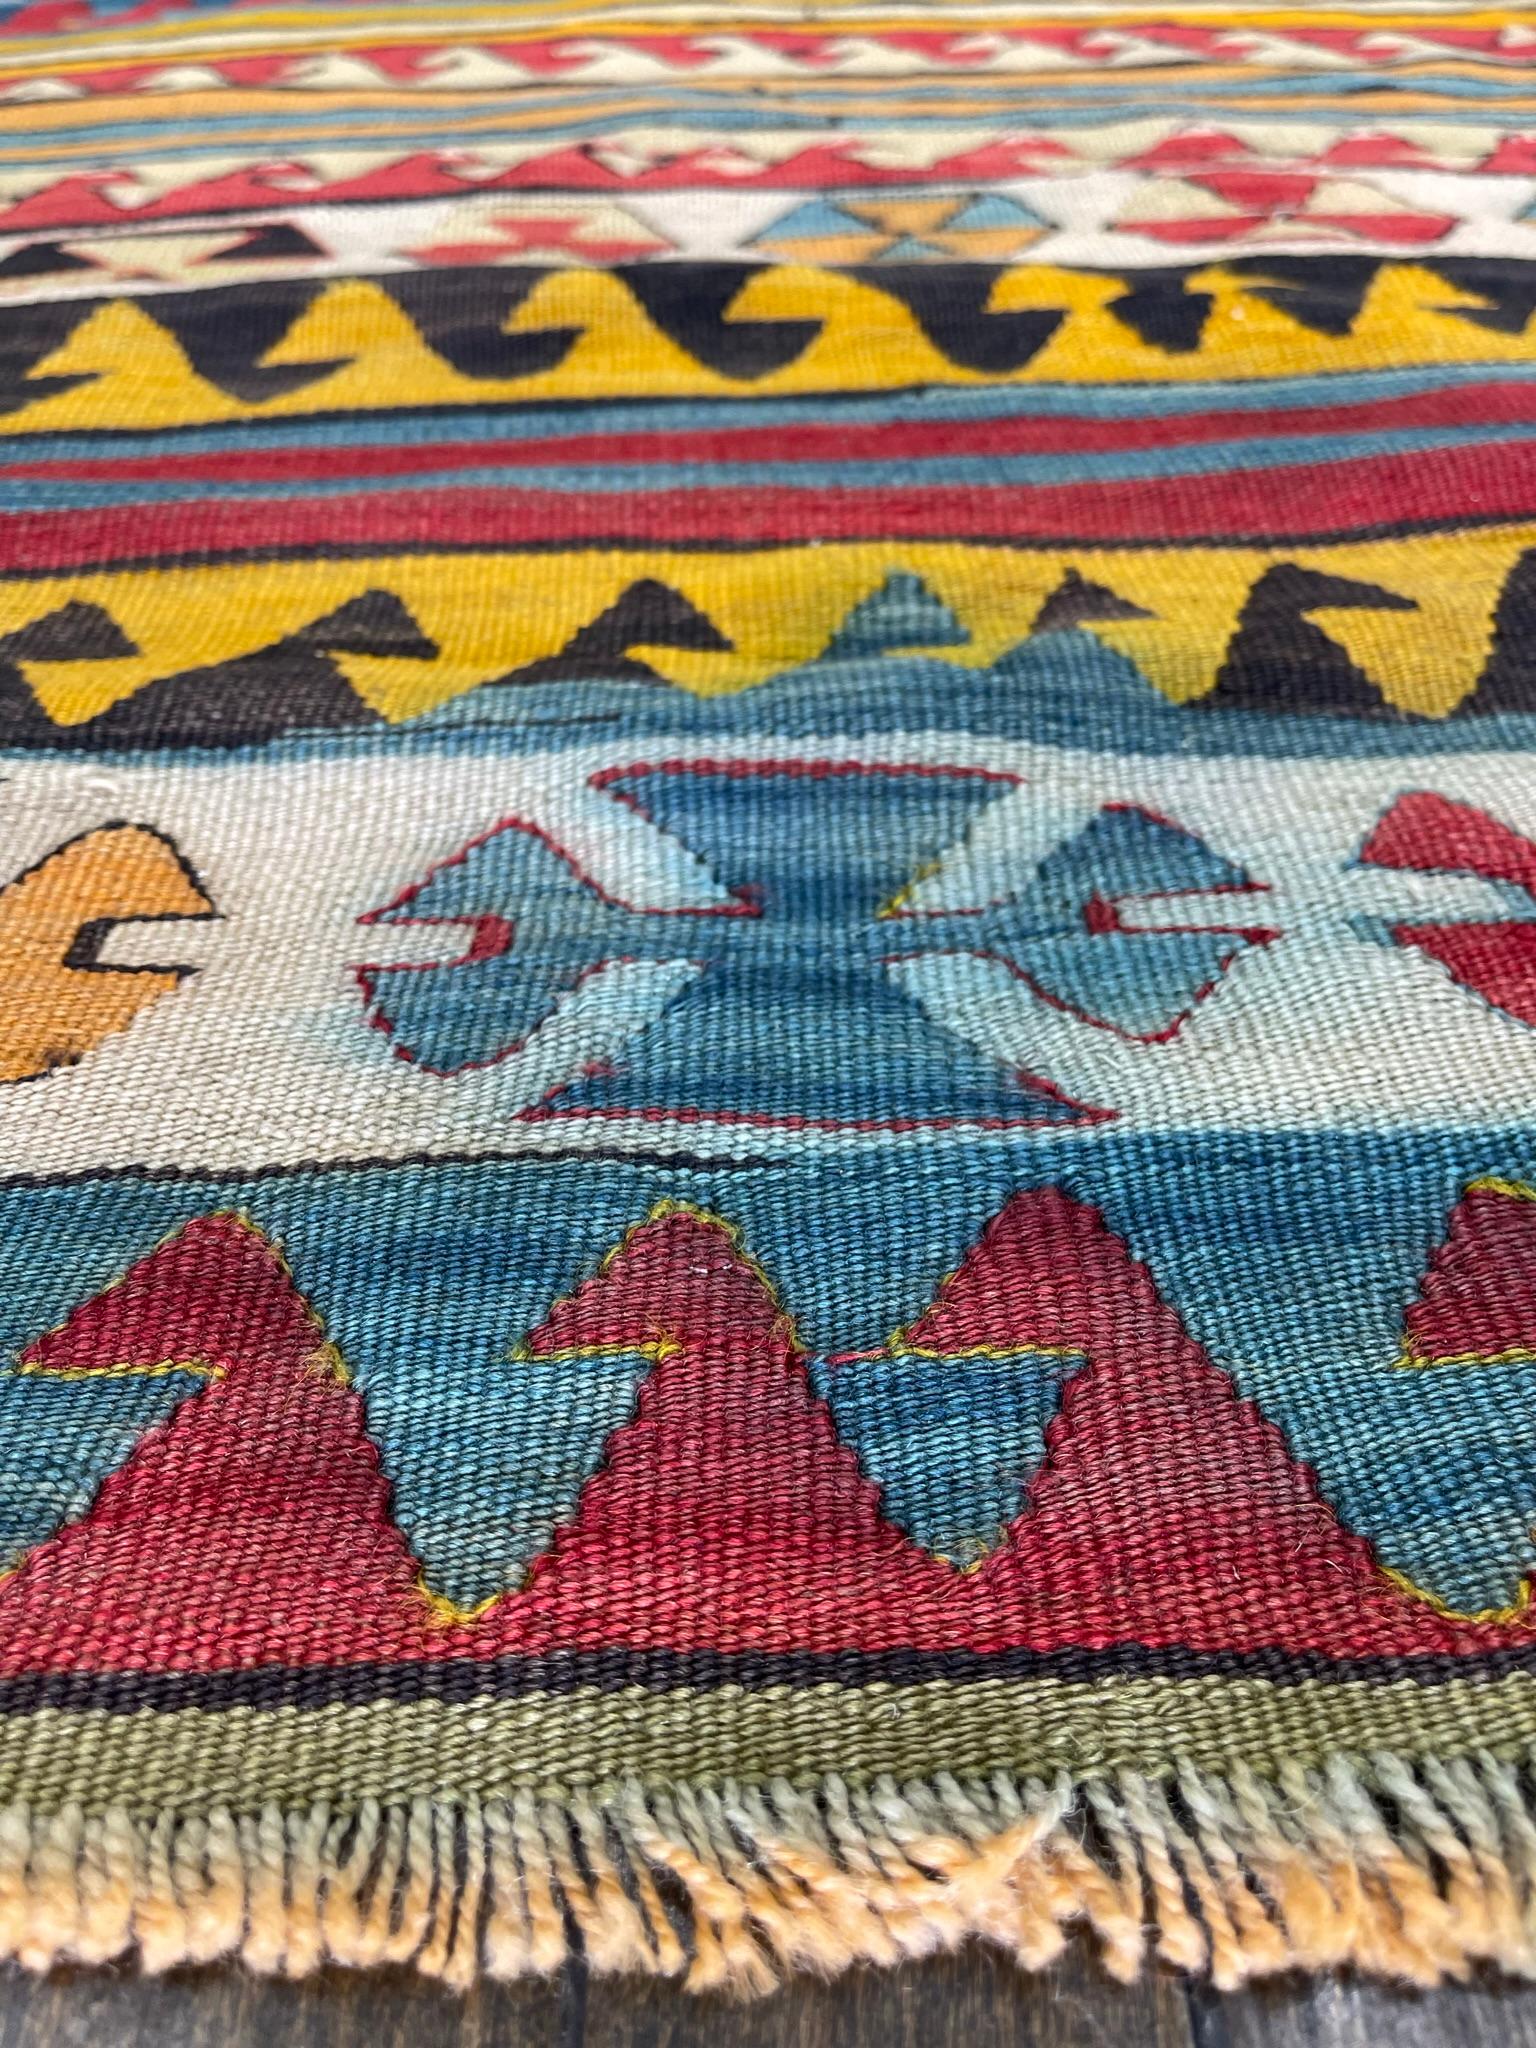 This rug is hand woven in the Shirvan district of Caucasus mountains region. The tiny very rare Shirvan is a fine example of the very best weaving of the shirvan region. The intricate detail and totemic symbols combine with the superb vegetable dues